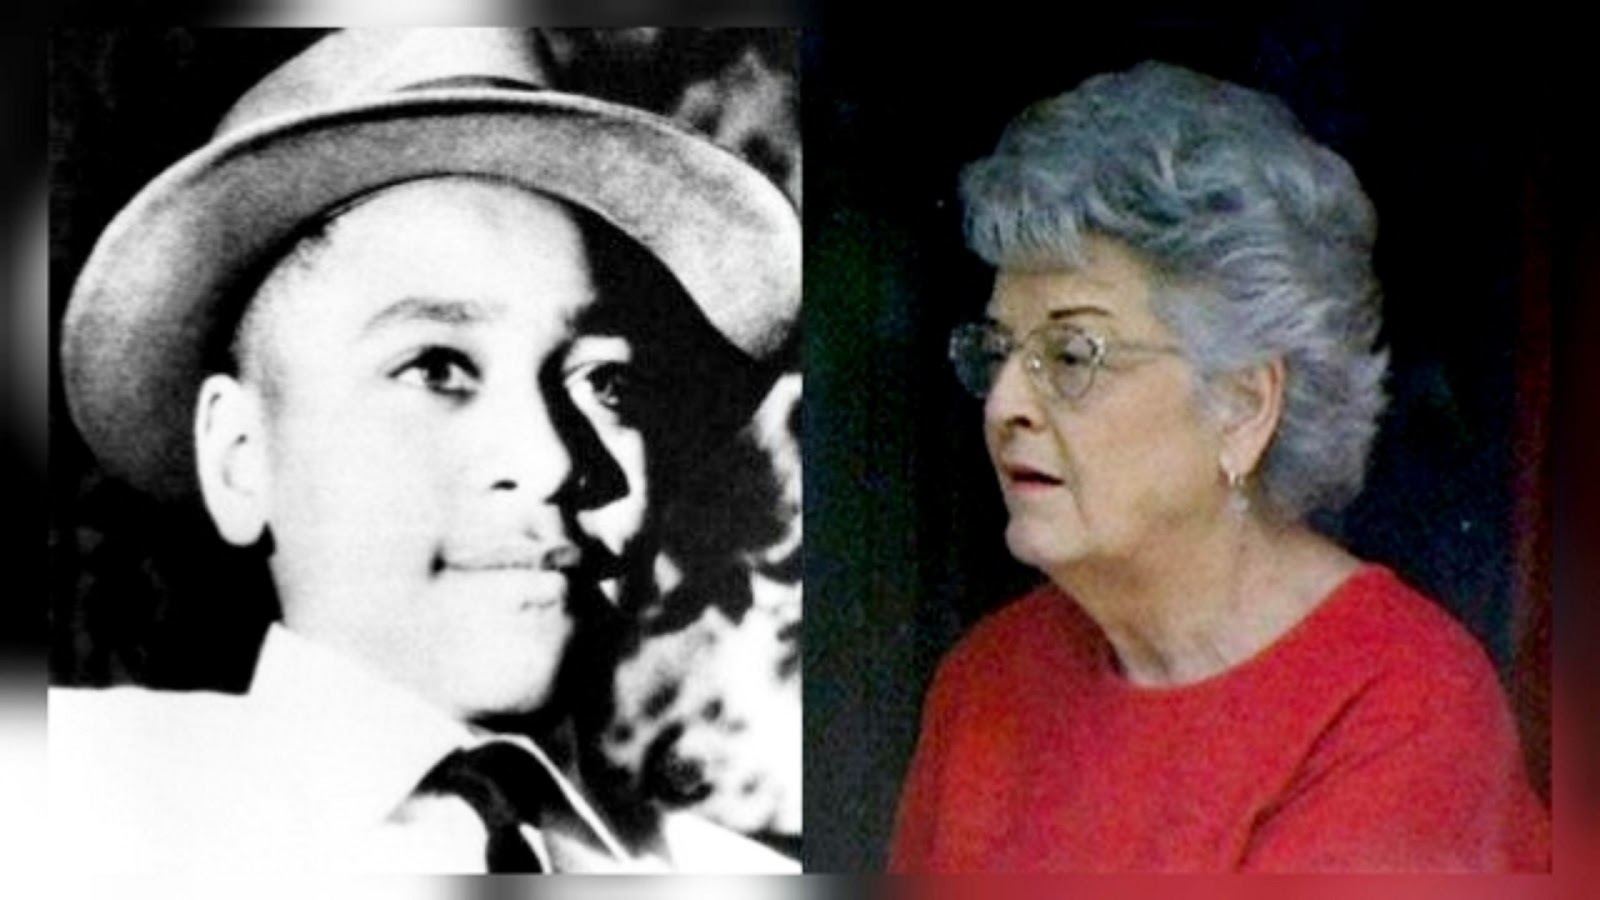 Emmett Till’s Family Requests Arrest of Carolyn Bryant On Grounds Of False Accusation | My Beautiful Black Ancestry